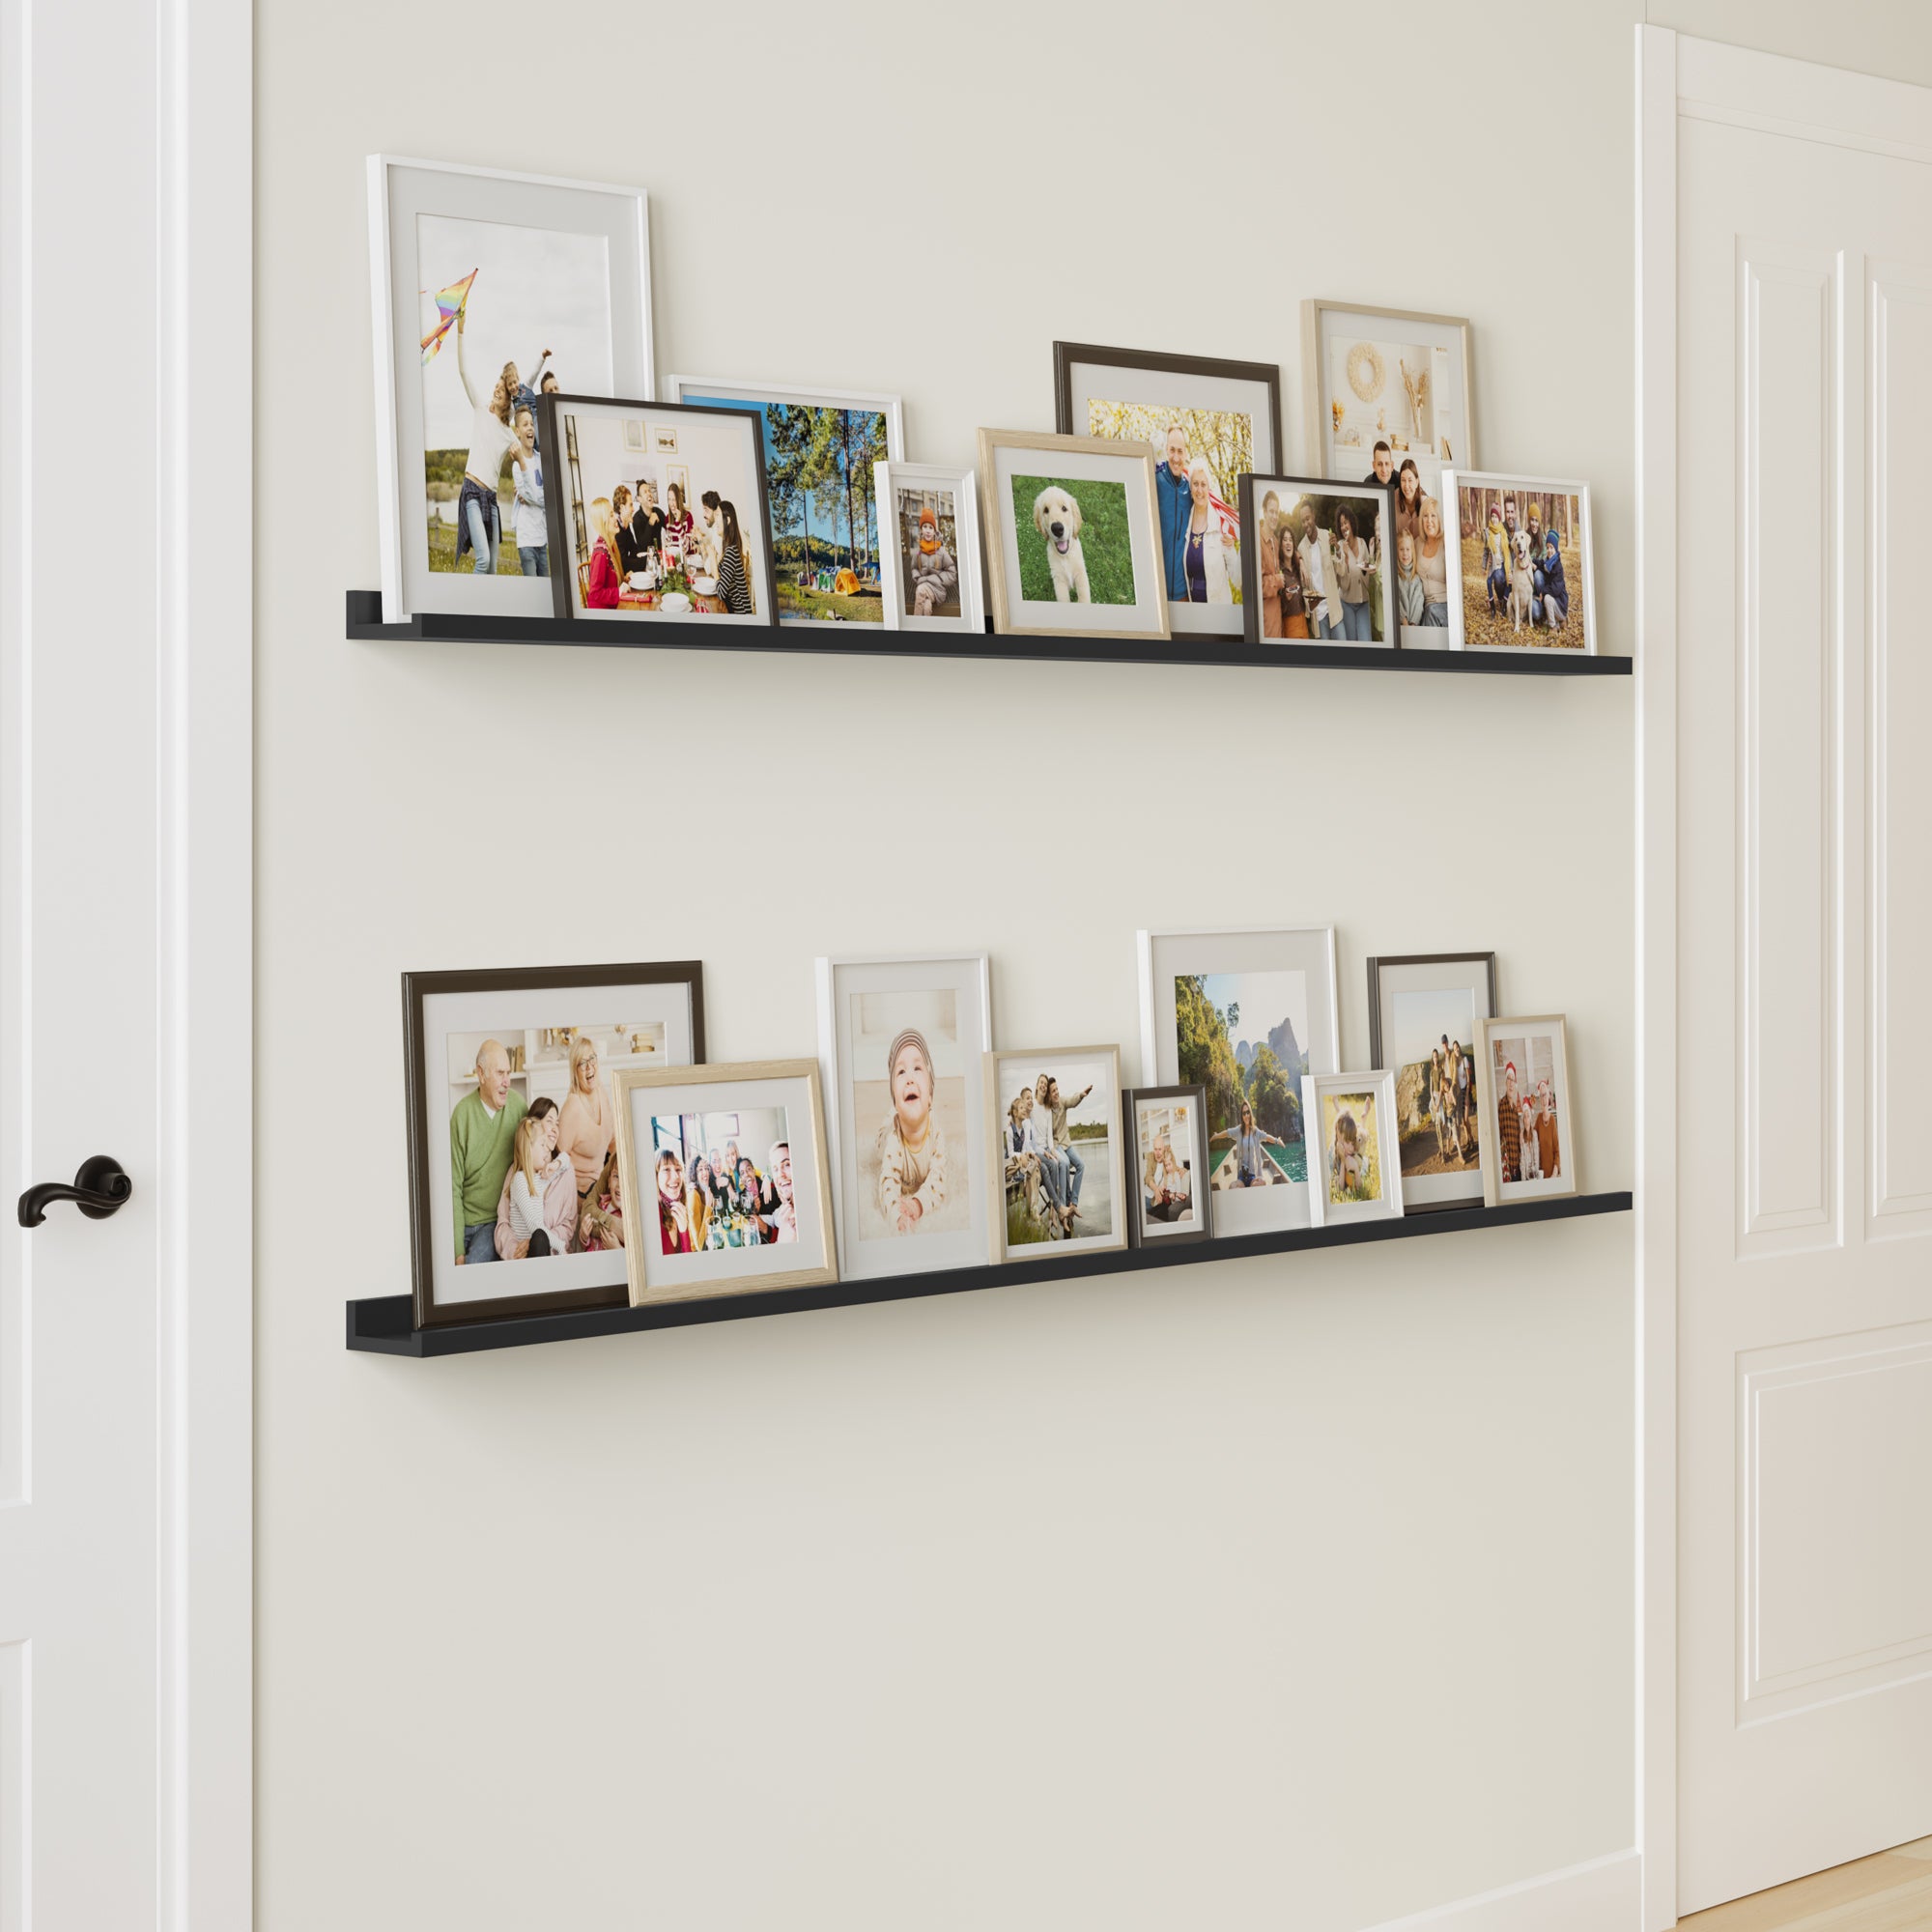 A hallway with a long black shelf displaying an array of colorful framed family photos, creating a personal touch.